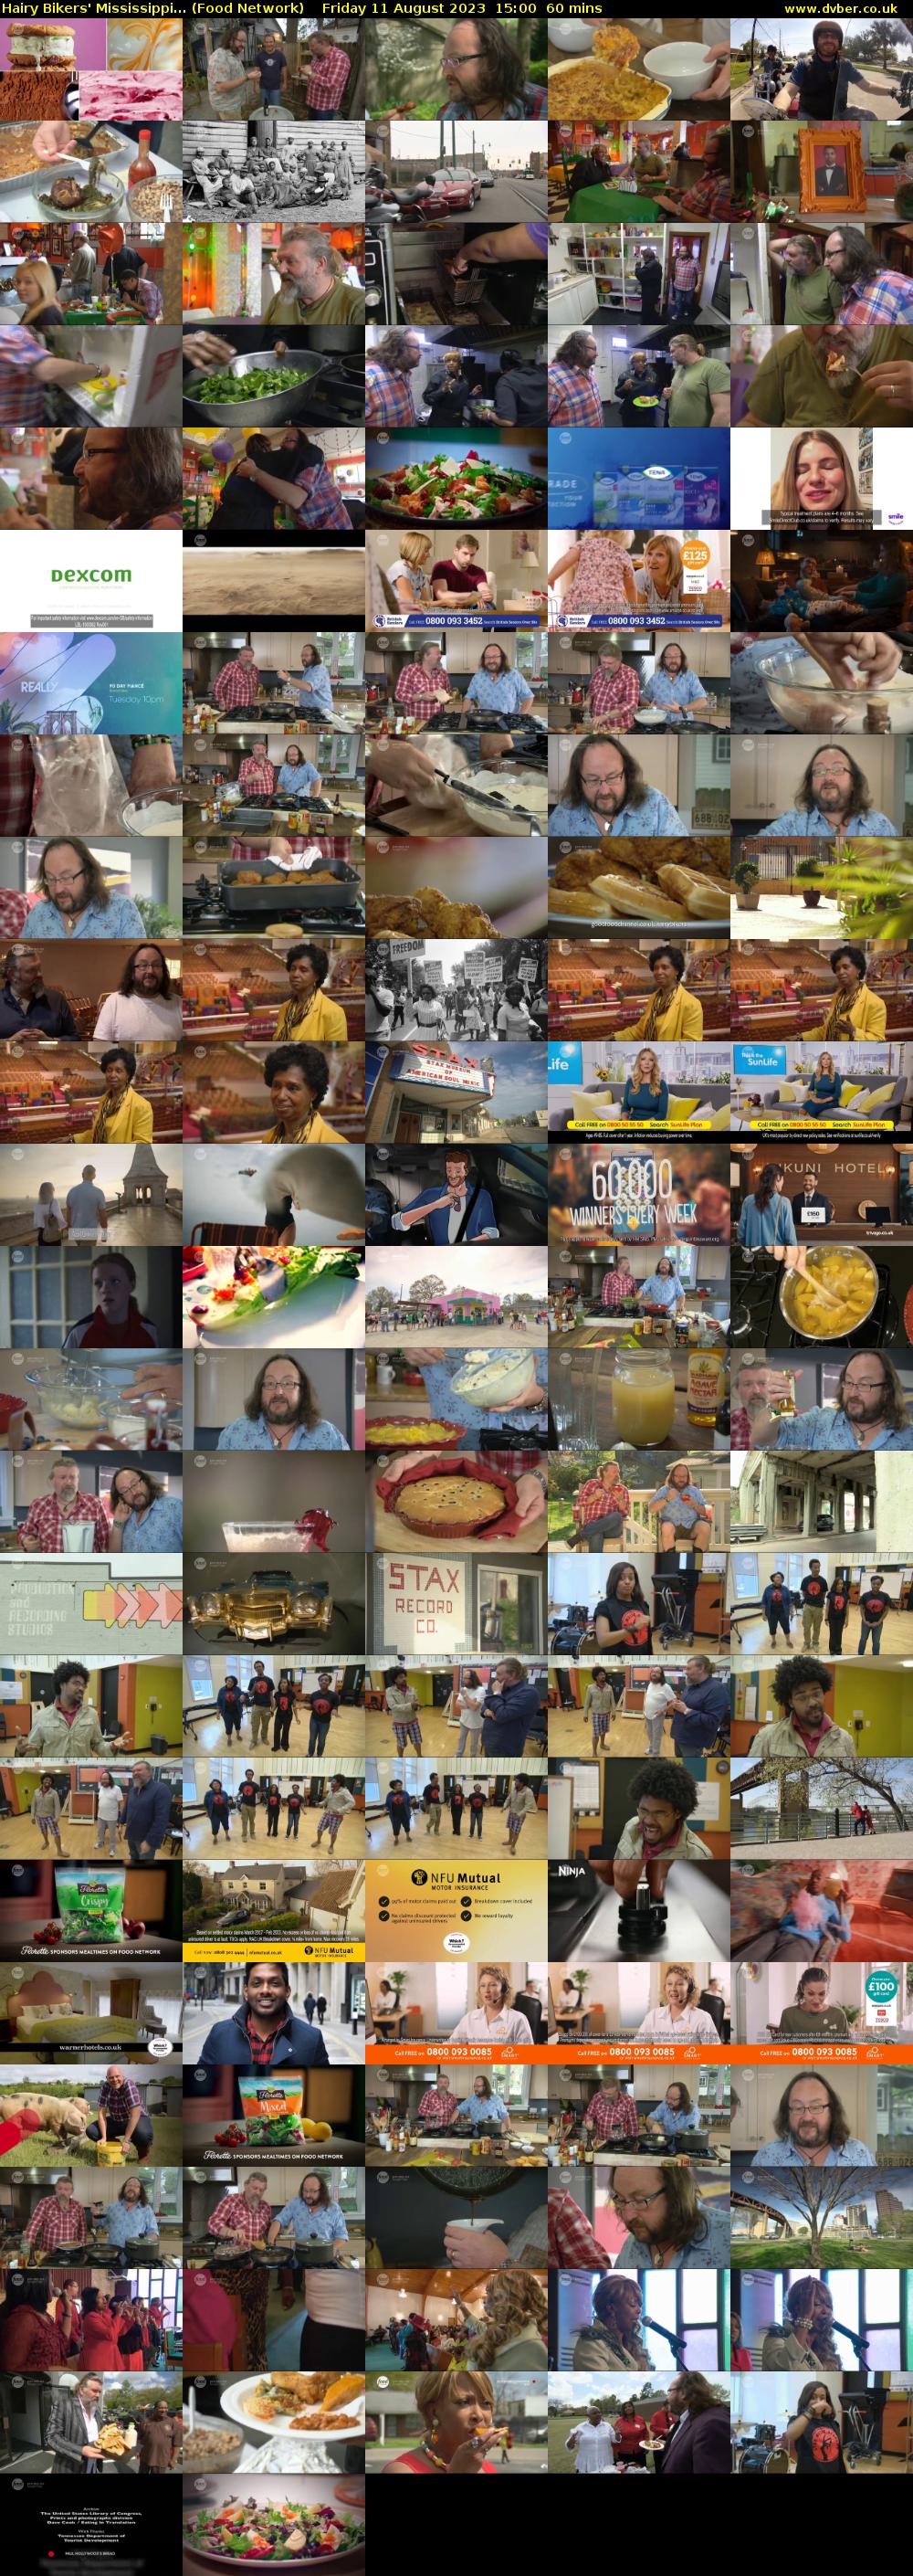 Hairy Bikers' Mississippi... (Food Network) Friday 11 August 2023 15:00 - 16:00